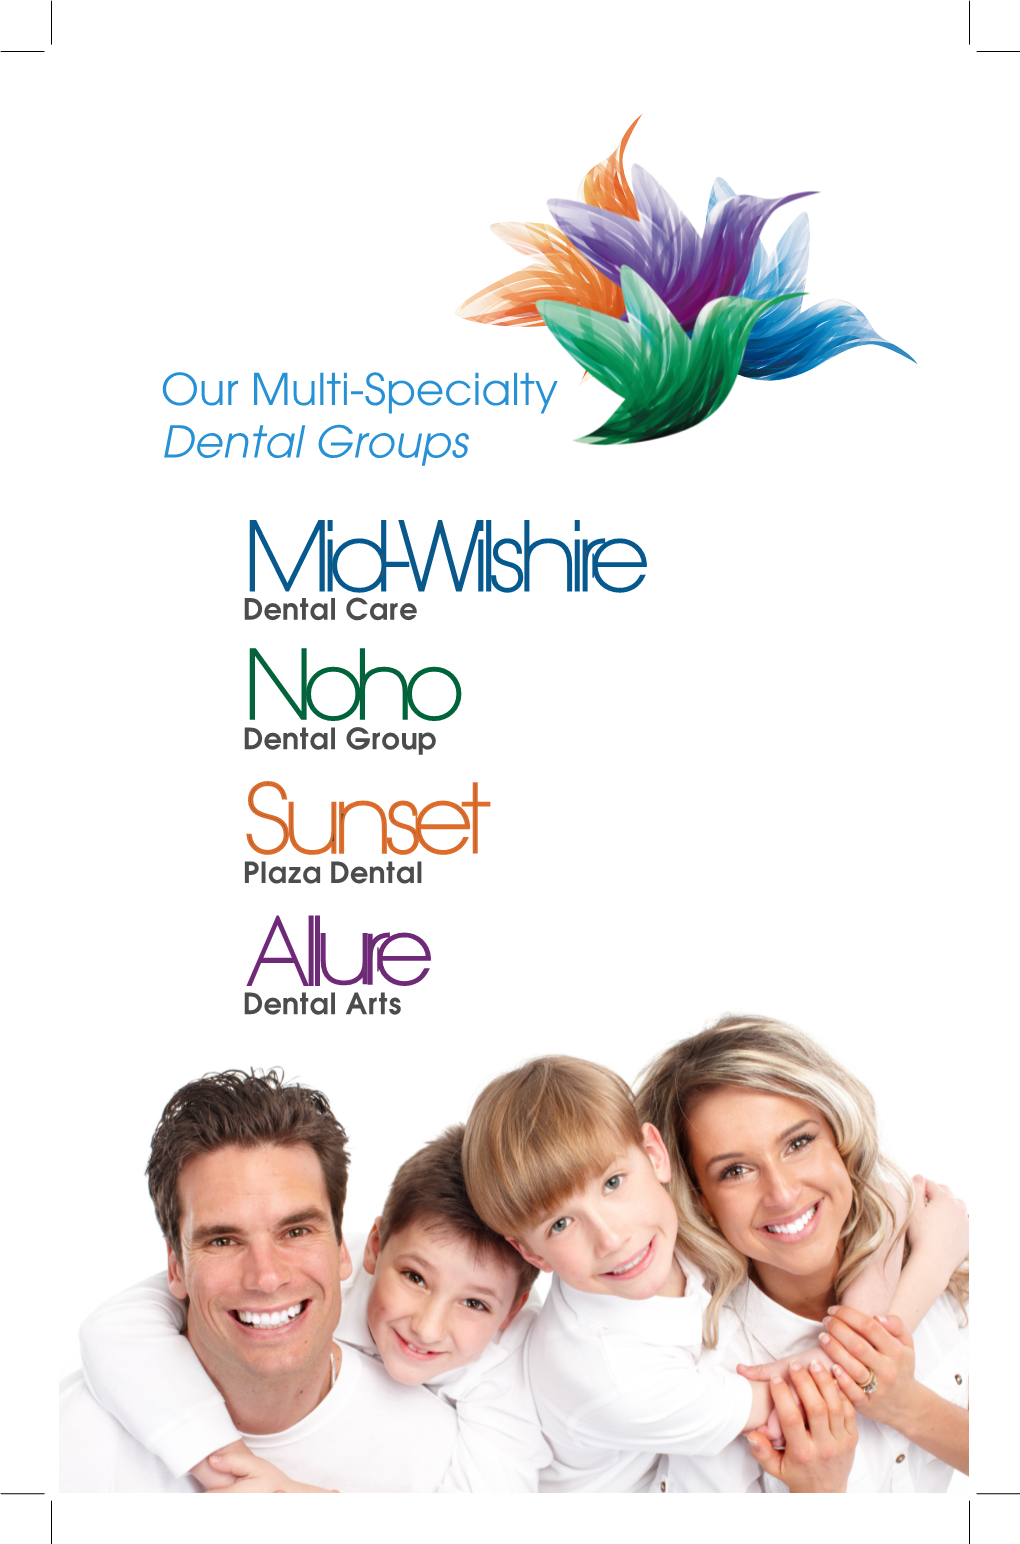 Our Multi-Specialty Dental Groups General & Cosmetic Dentistry Orthodontics & Invisalign Children’S Dentistry Oral Surgery